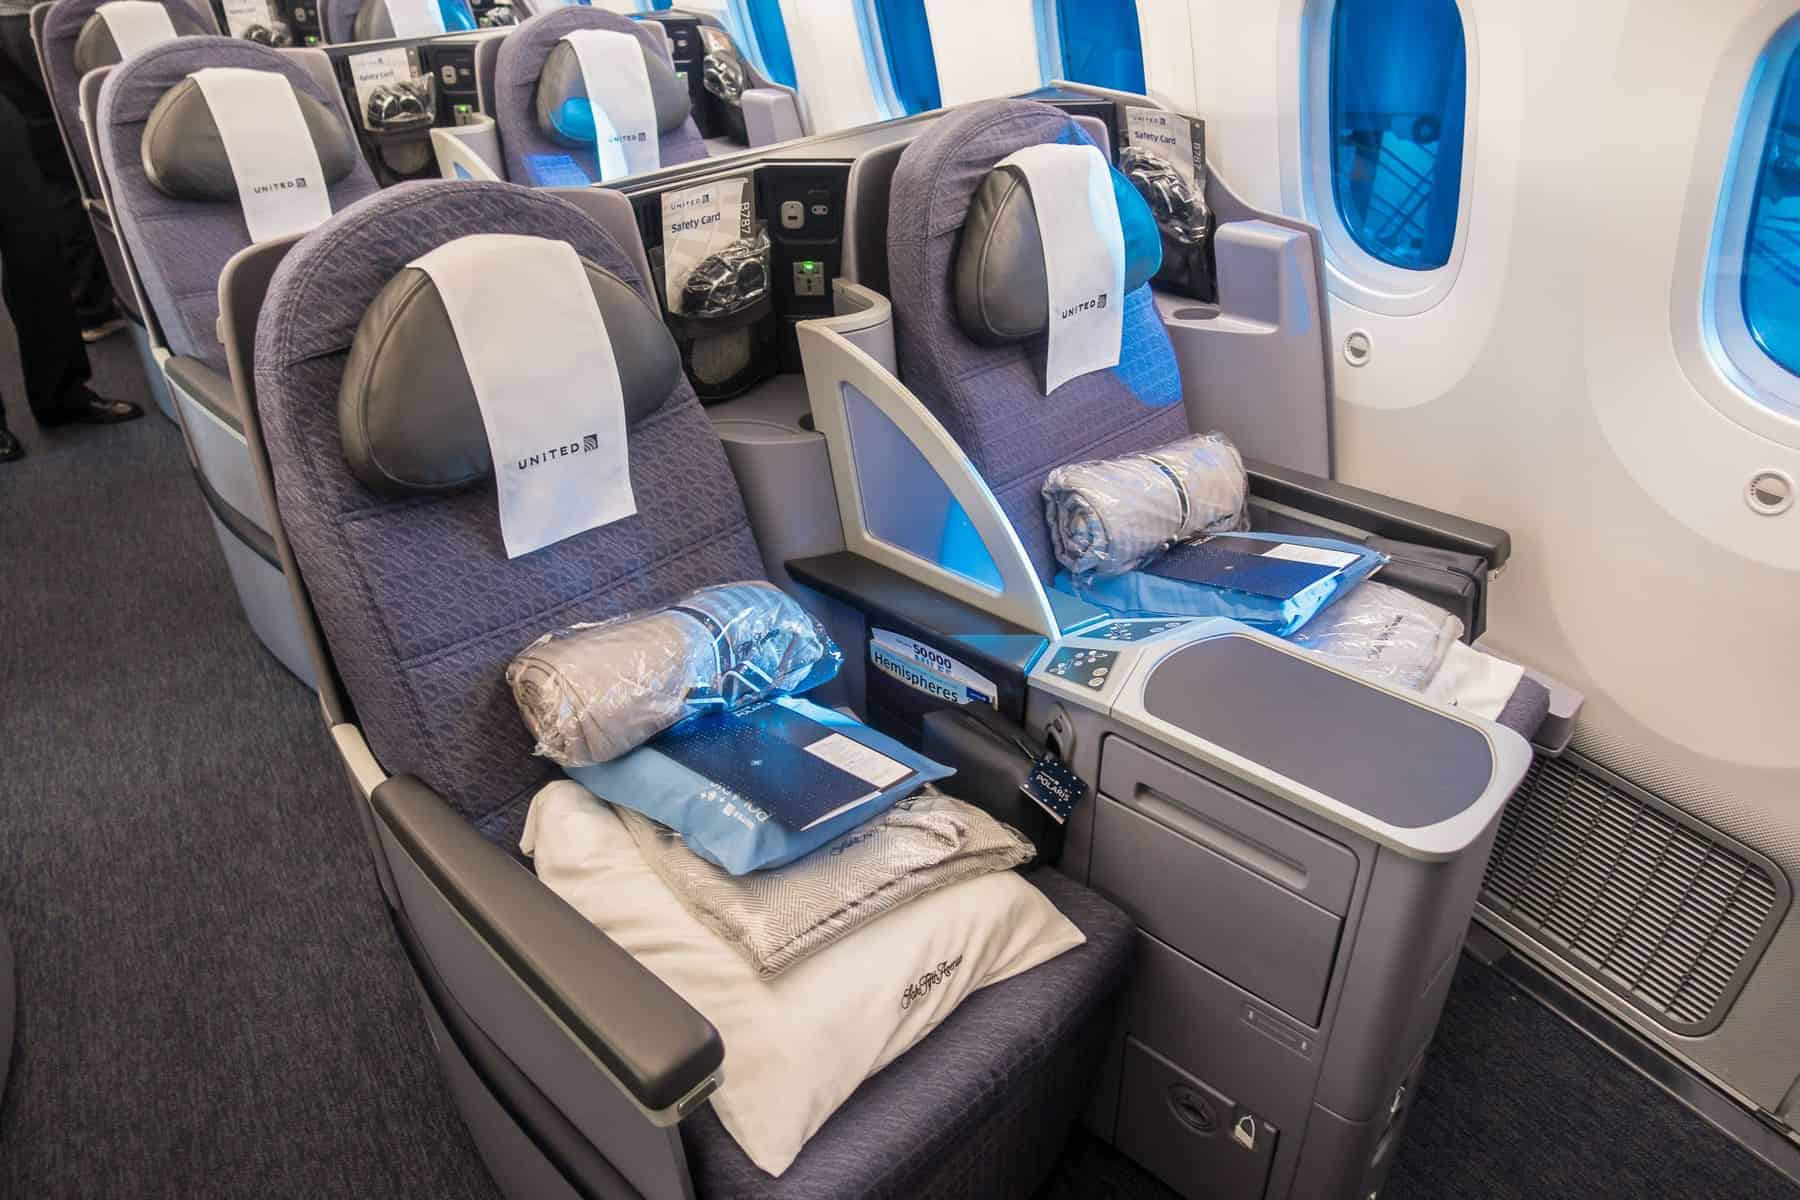 Review: United Airlines B787-8 - Business Class | Milesopedia